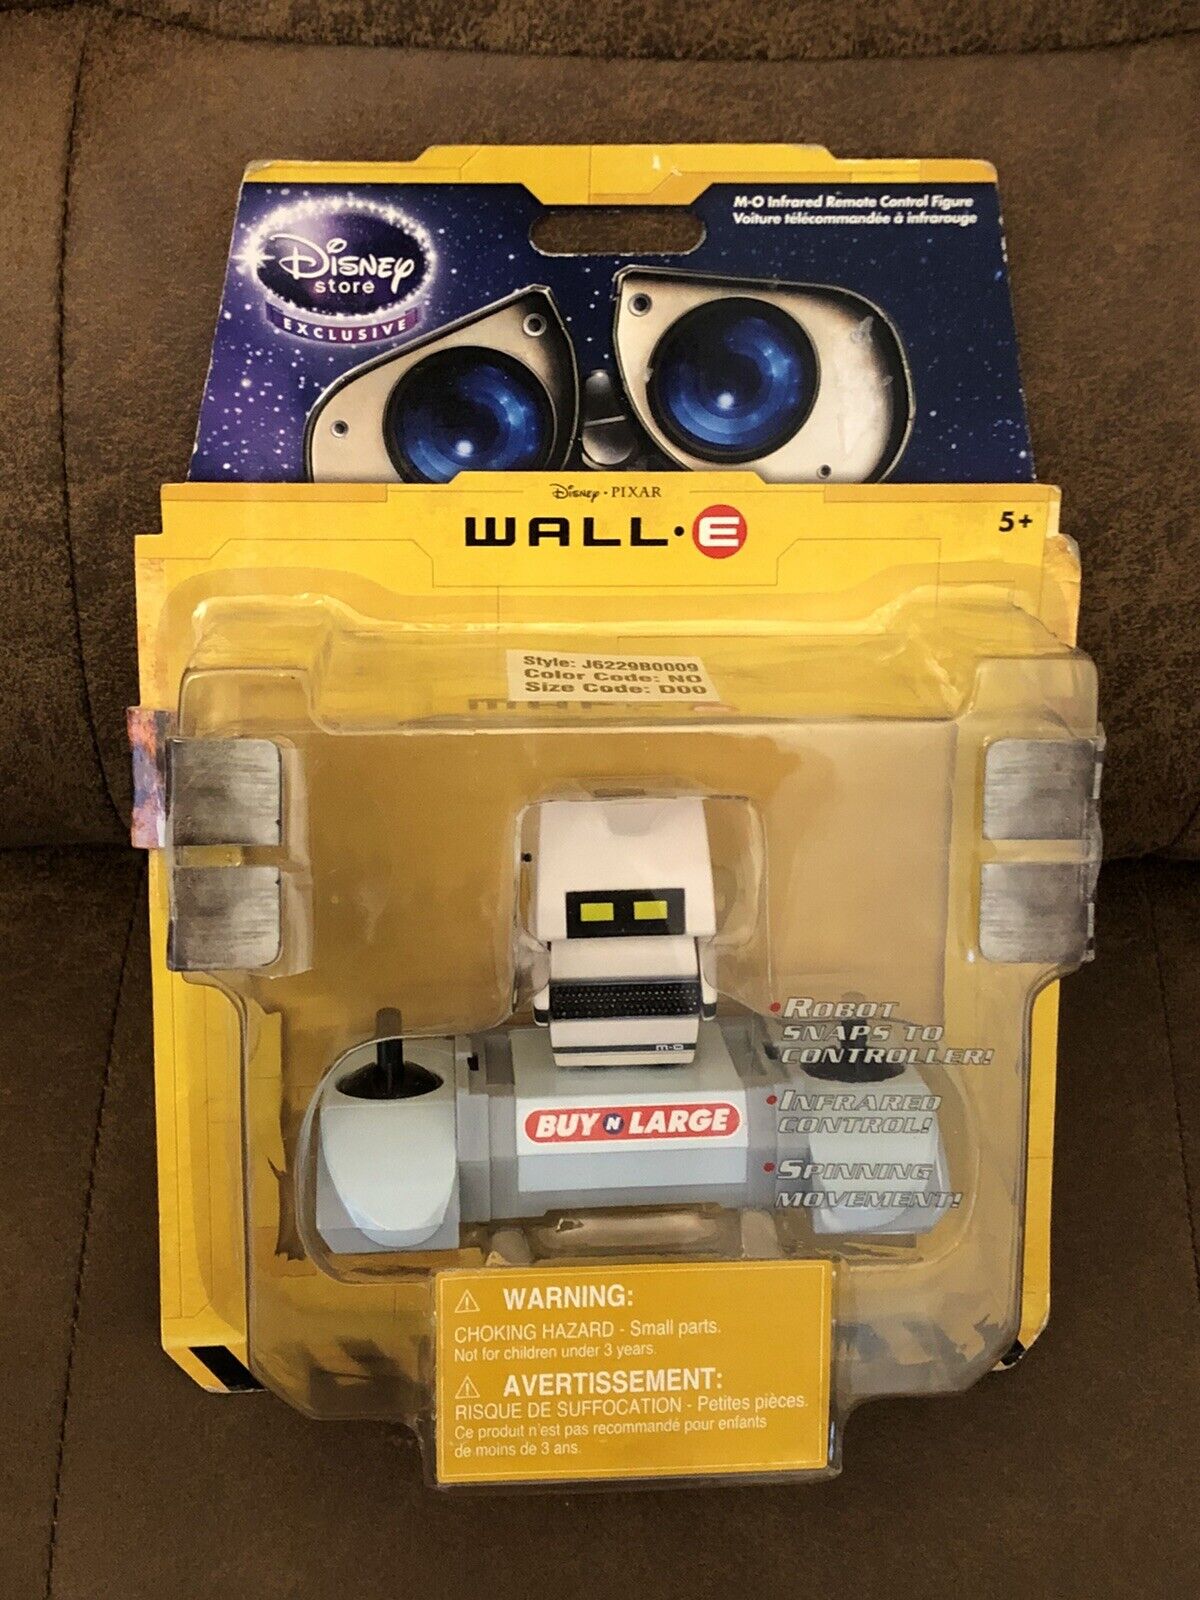 Wall E Robot M-O Toy Remote Control Buy N Large Disney Store Exclusive RC New